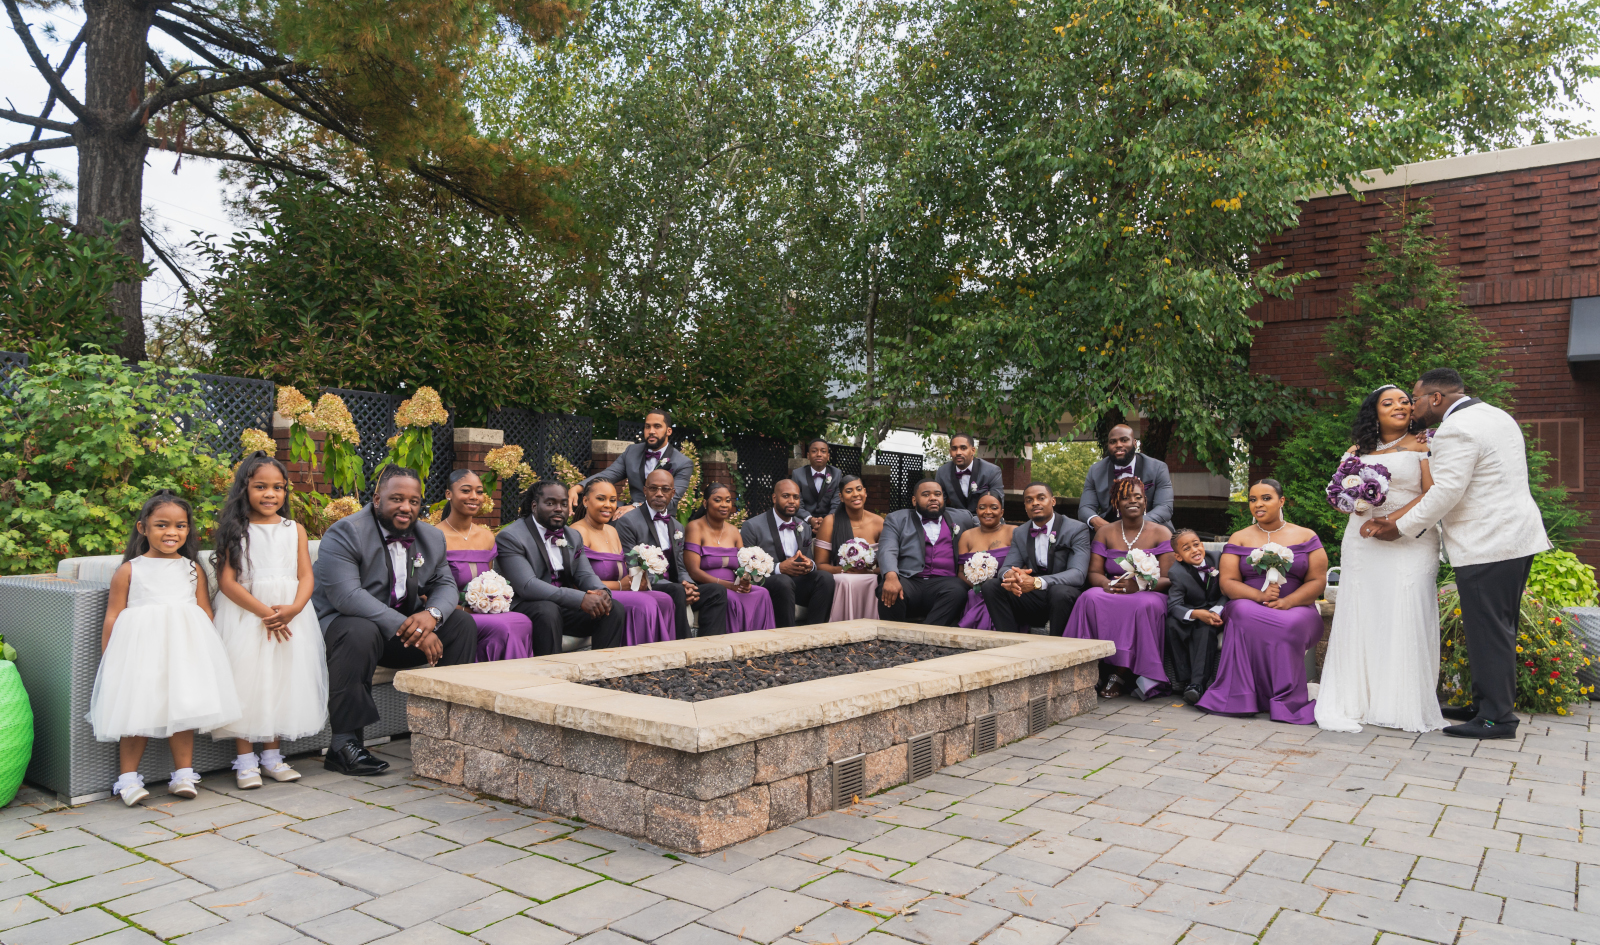 Bride and groom with bridal party, bridal party portrait, large bridal party, kiss, outdoor, trees, courtyard, romantic wedding ceremony at Hilton Akron/Fairlawn